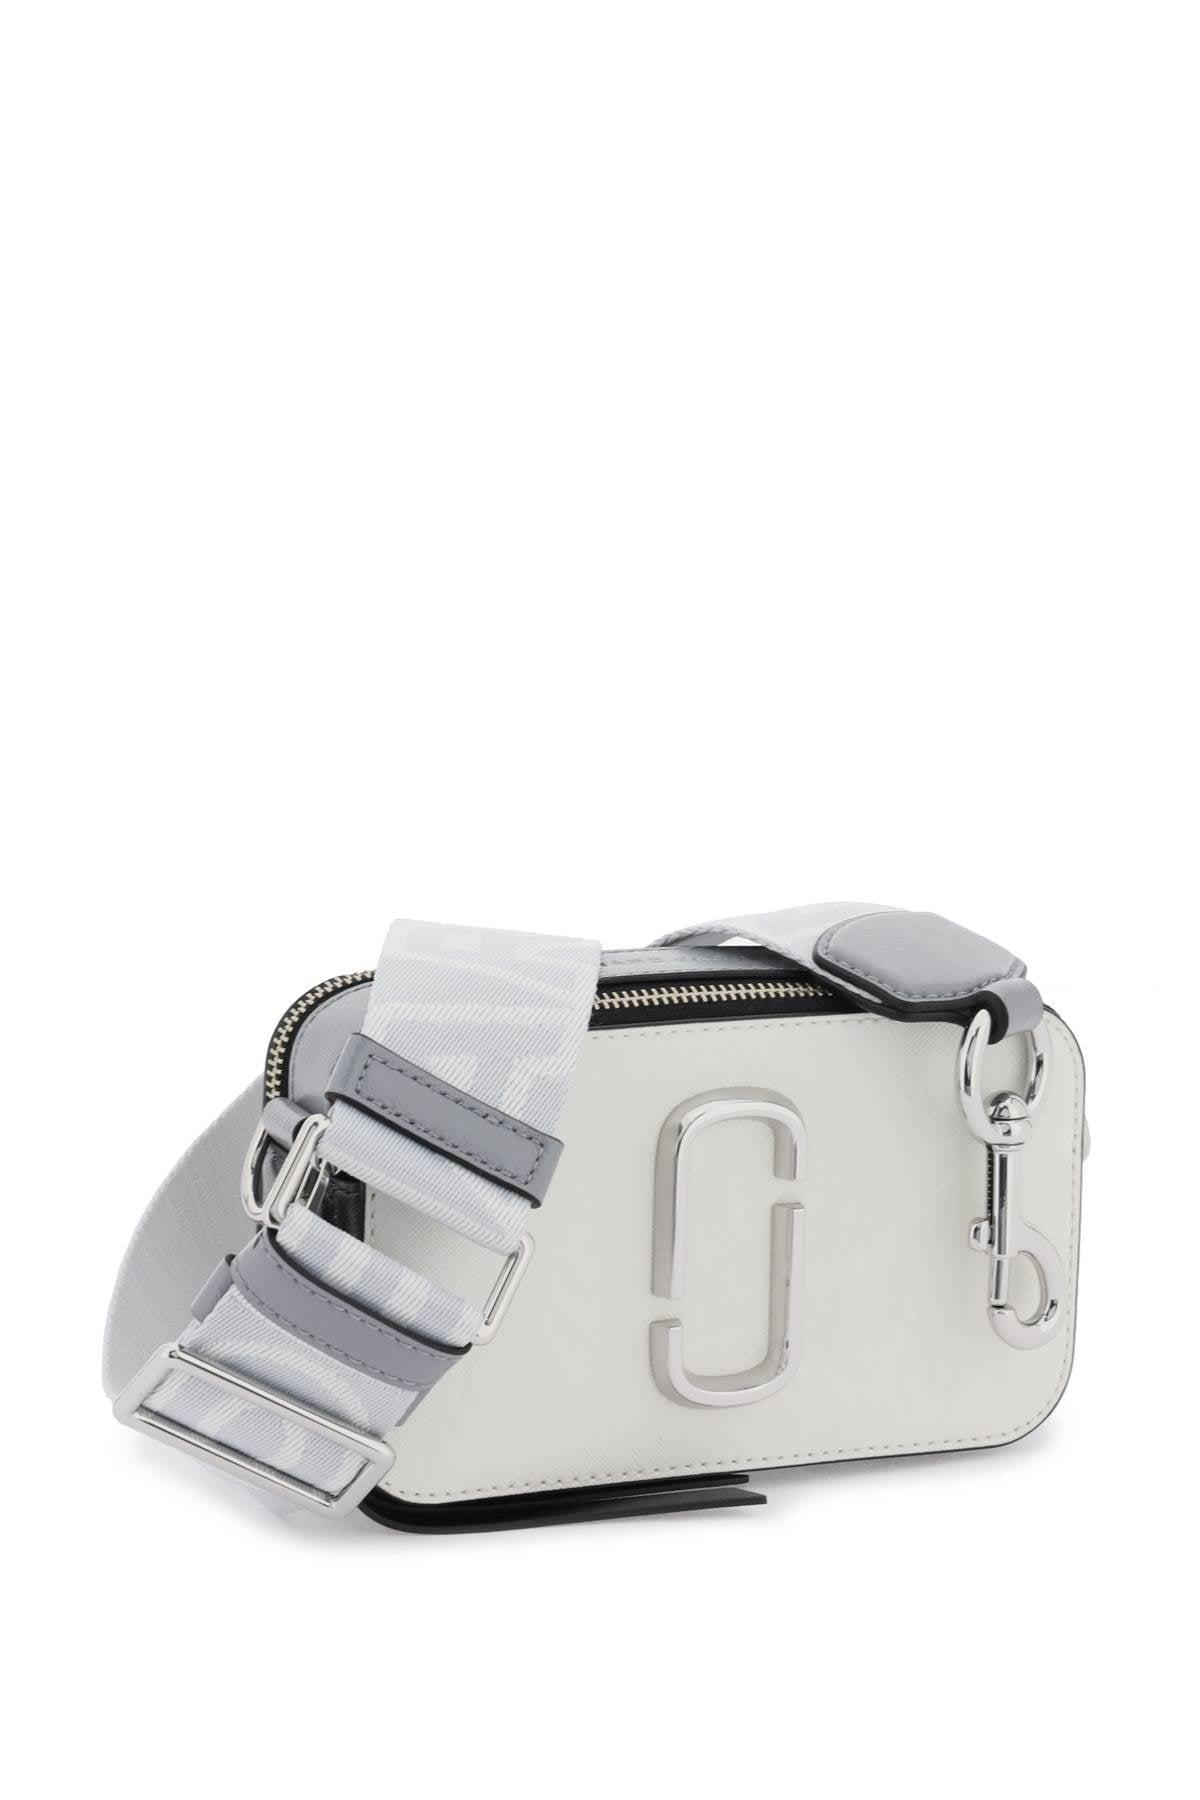 Marc Jacobs The Snapshot Leather Camera Bag in White